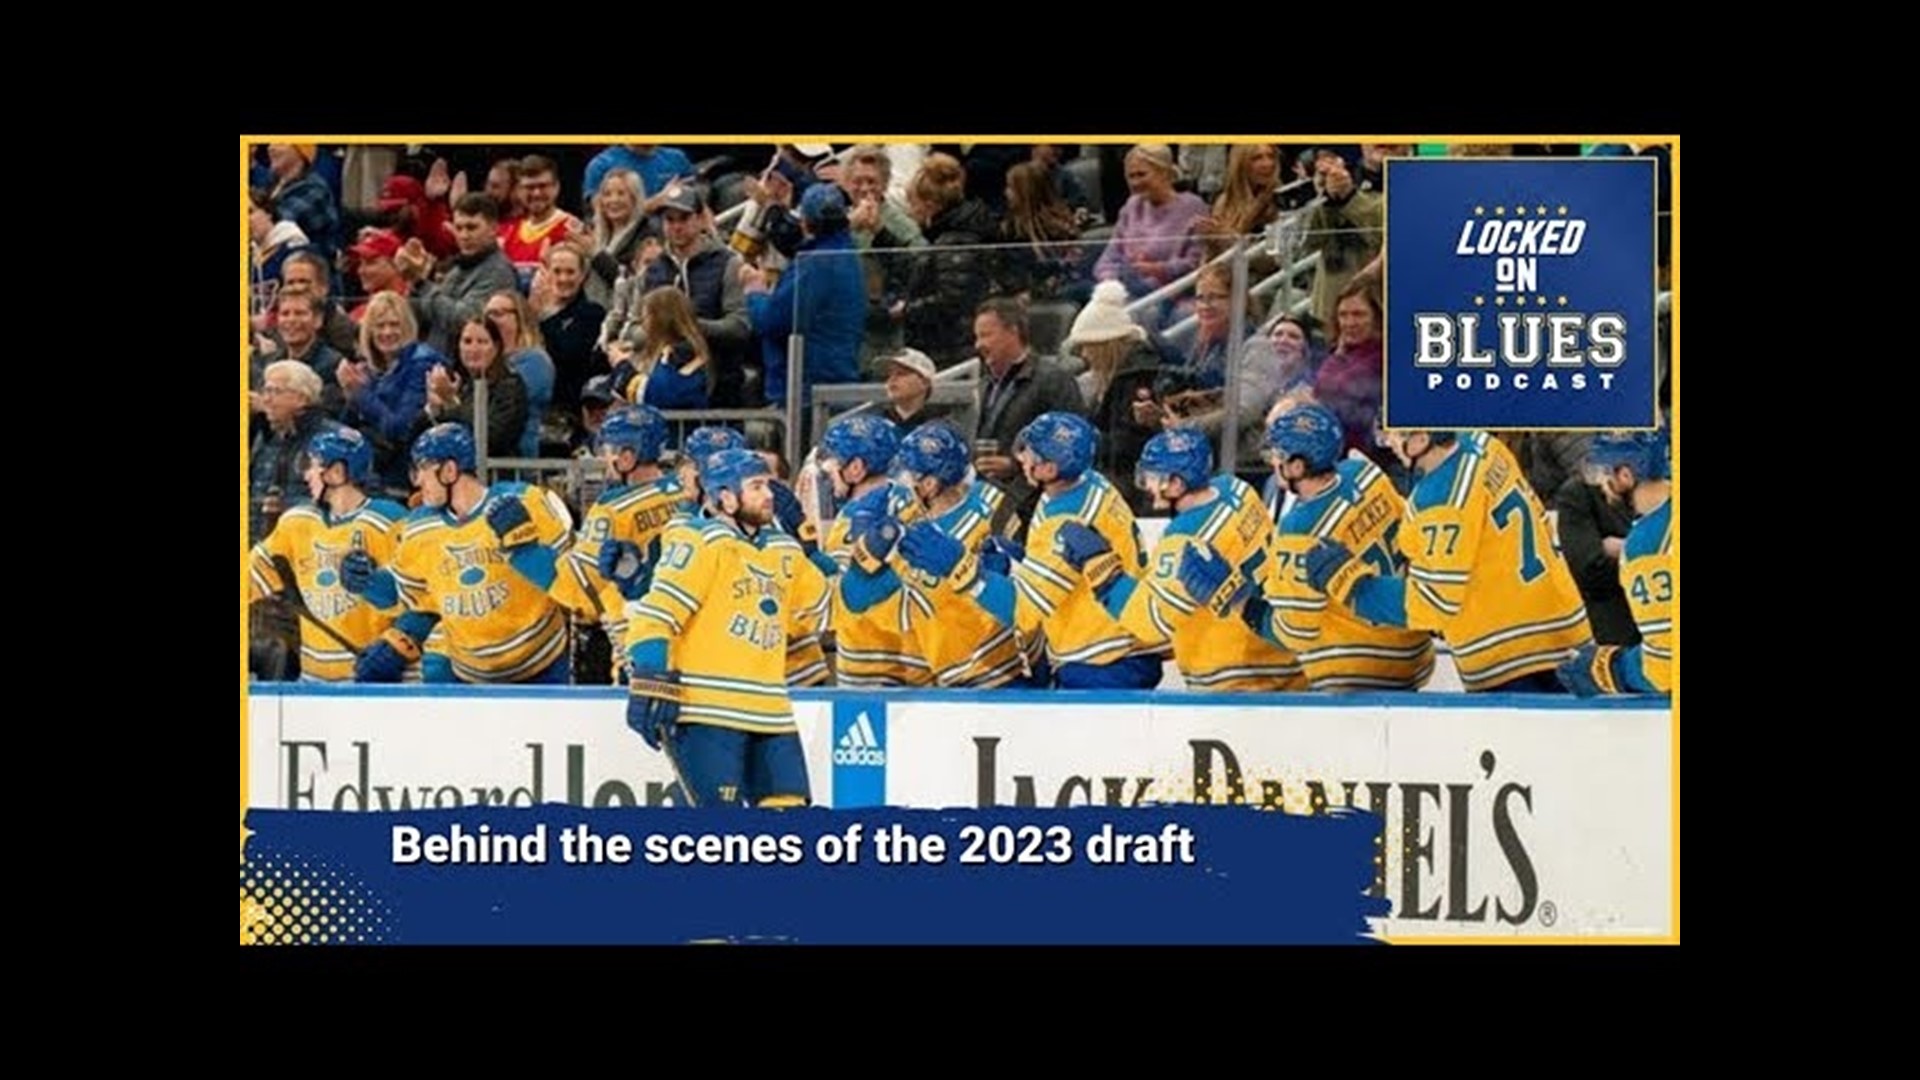 The St. Louis Blues 2023 Draft Behind The Scenes